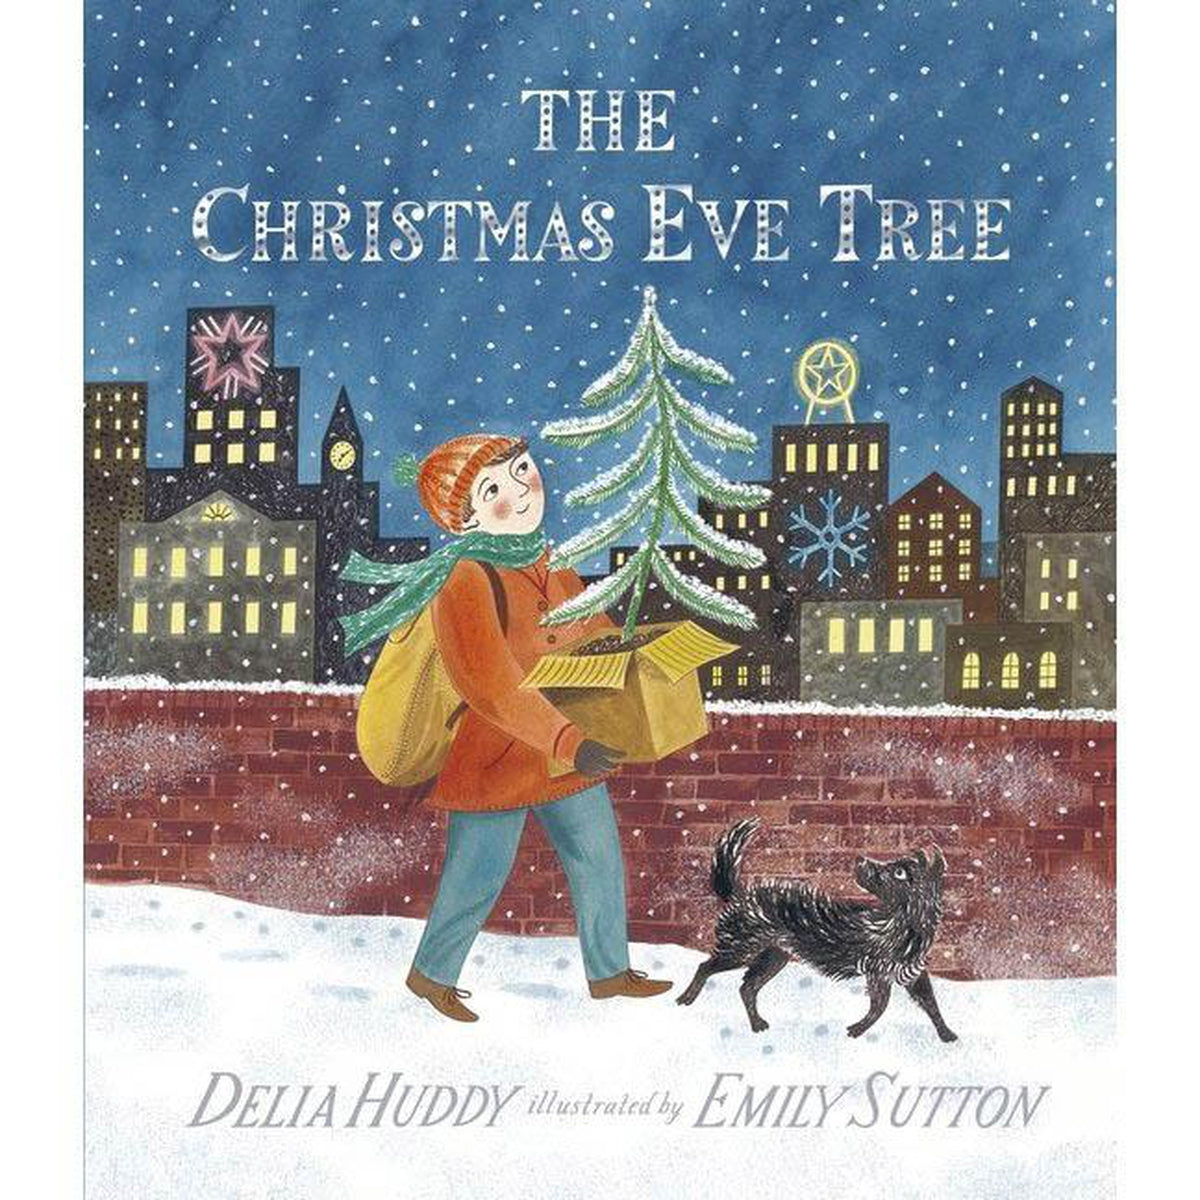 How the Grinch Stole Christmas book – Dilly Dally Kids